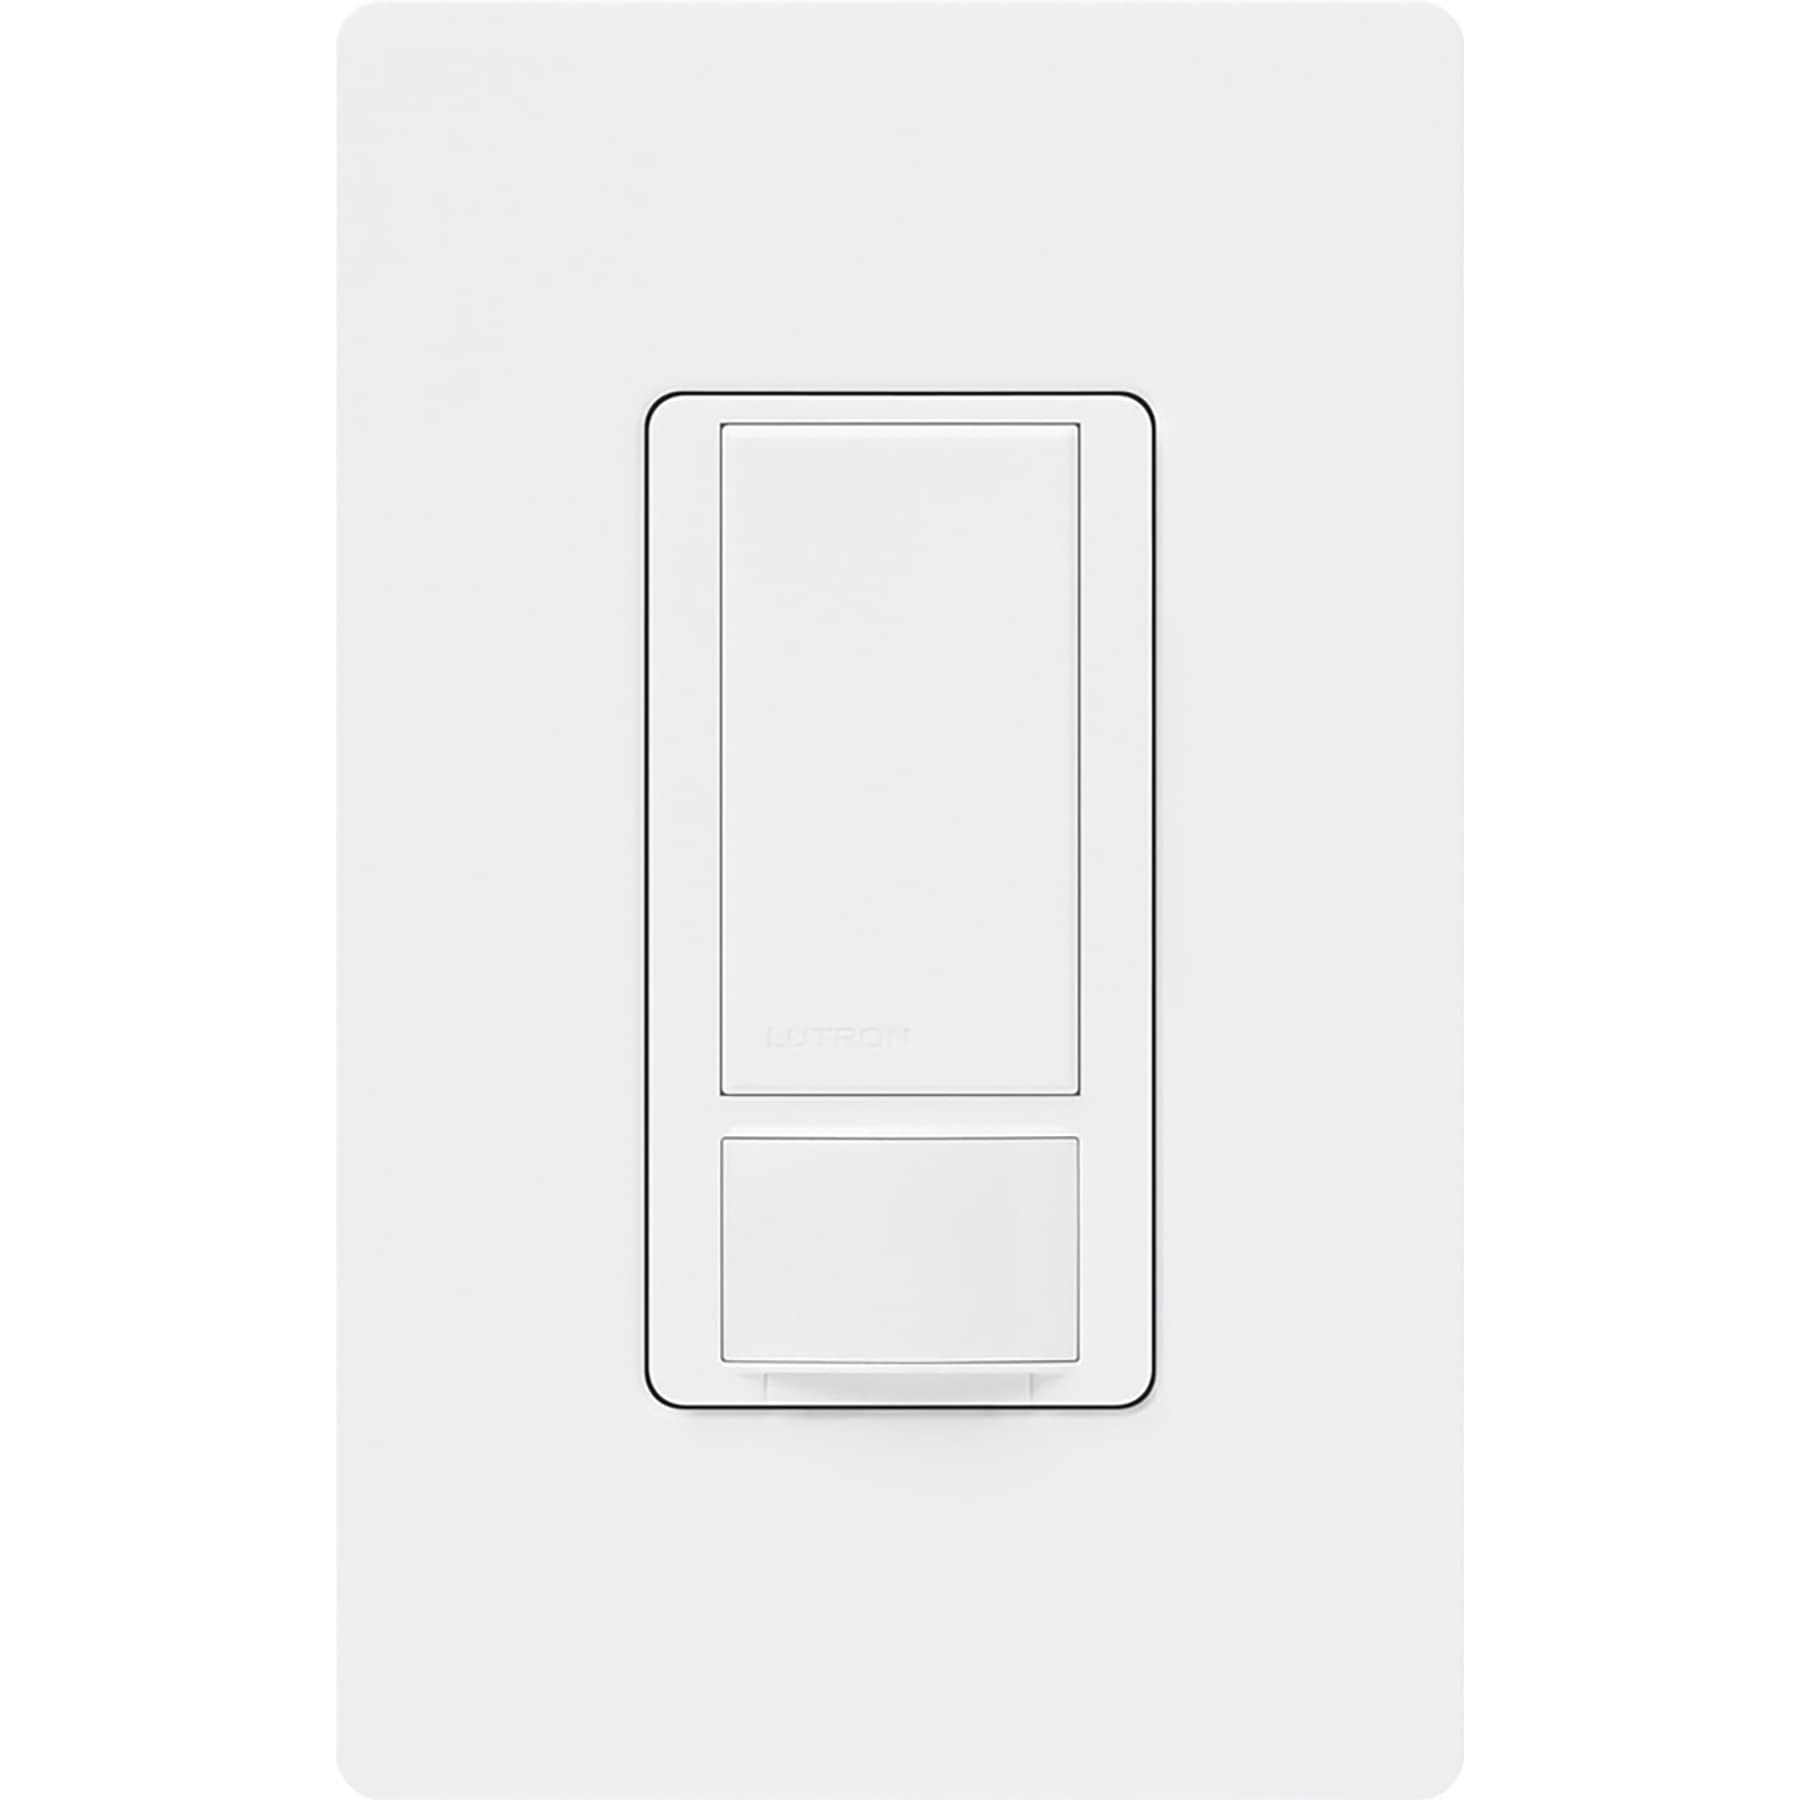 Lutron Maestro Motion Sensor Switch | 2 Amp, Single Pole | MS-OPS2H-2-WH | White (2-Pack) $33.51